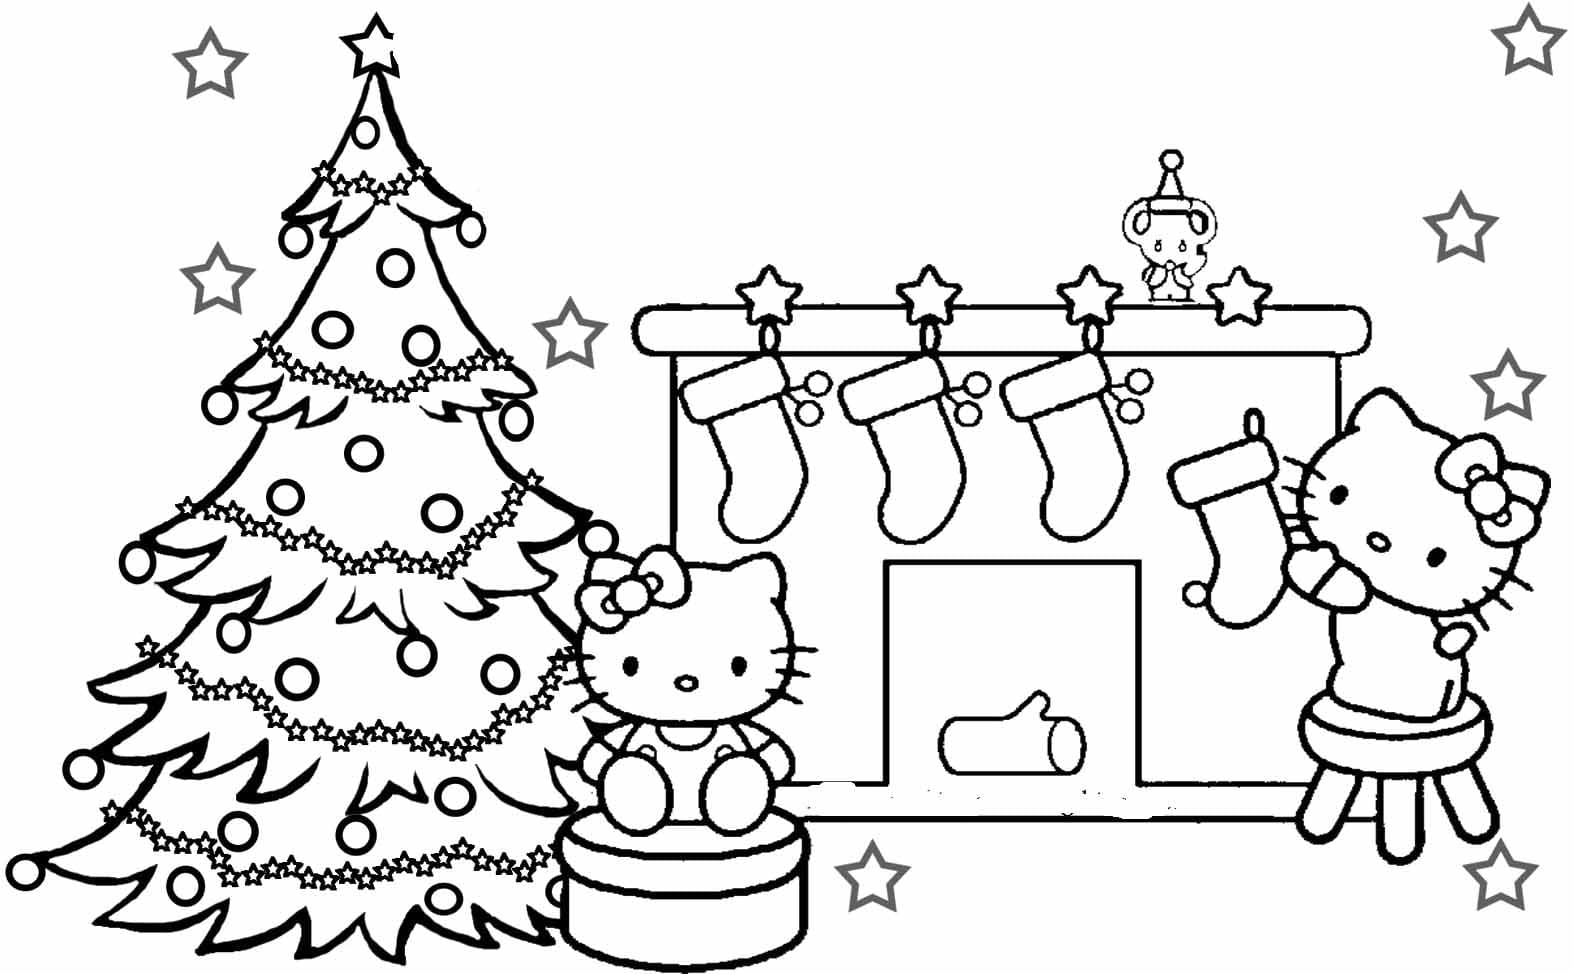 Ready For Christmas Coloring Pages   Coloring Cool